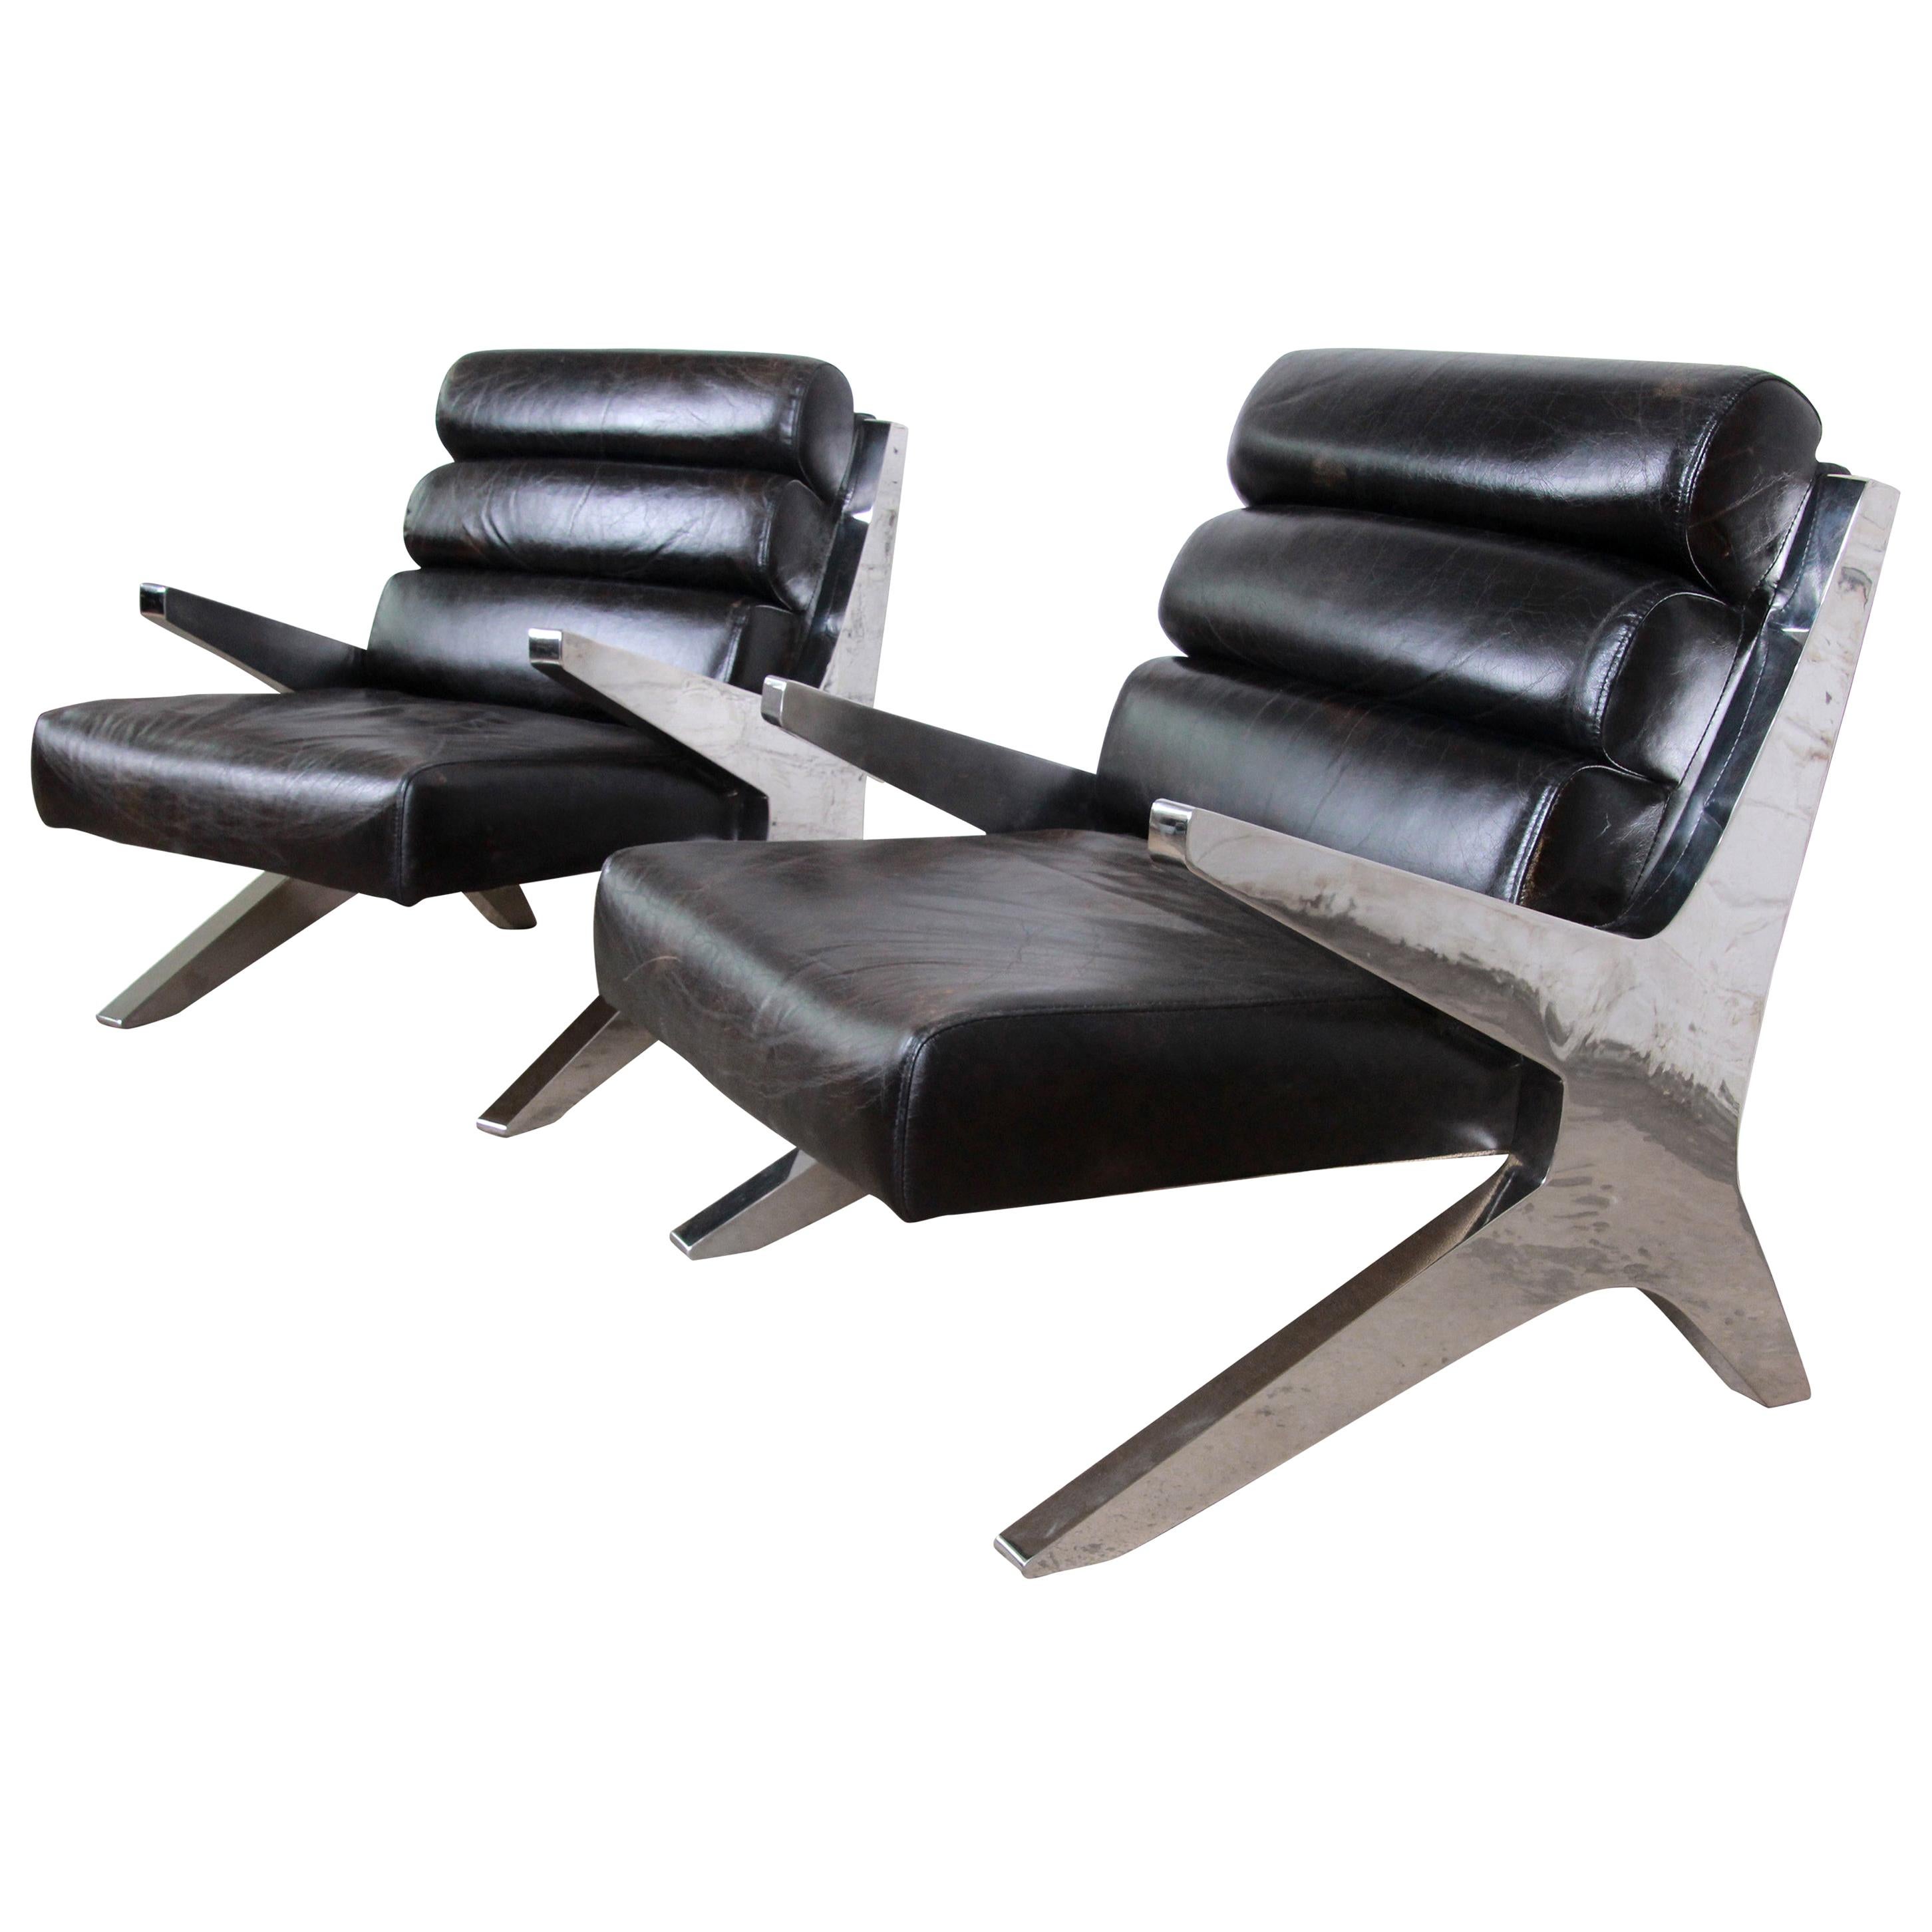 Mid-Century Modern Chrome and Leather Scissor Form Lounge Chairs, Pair